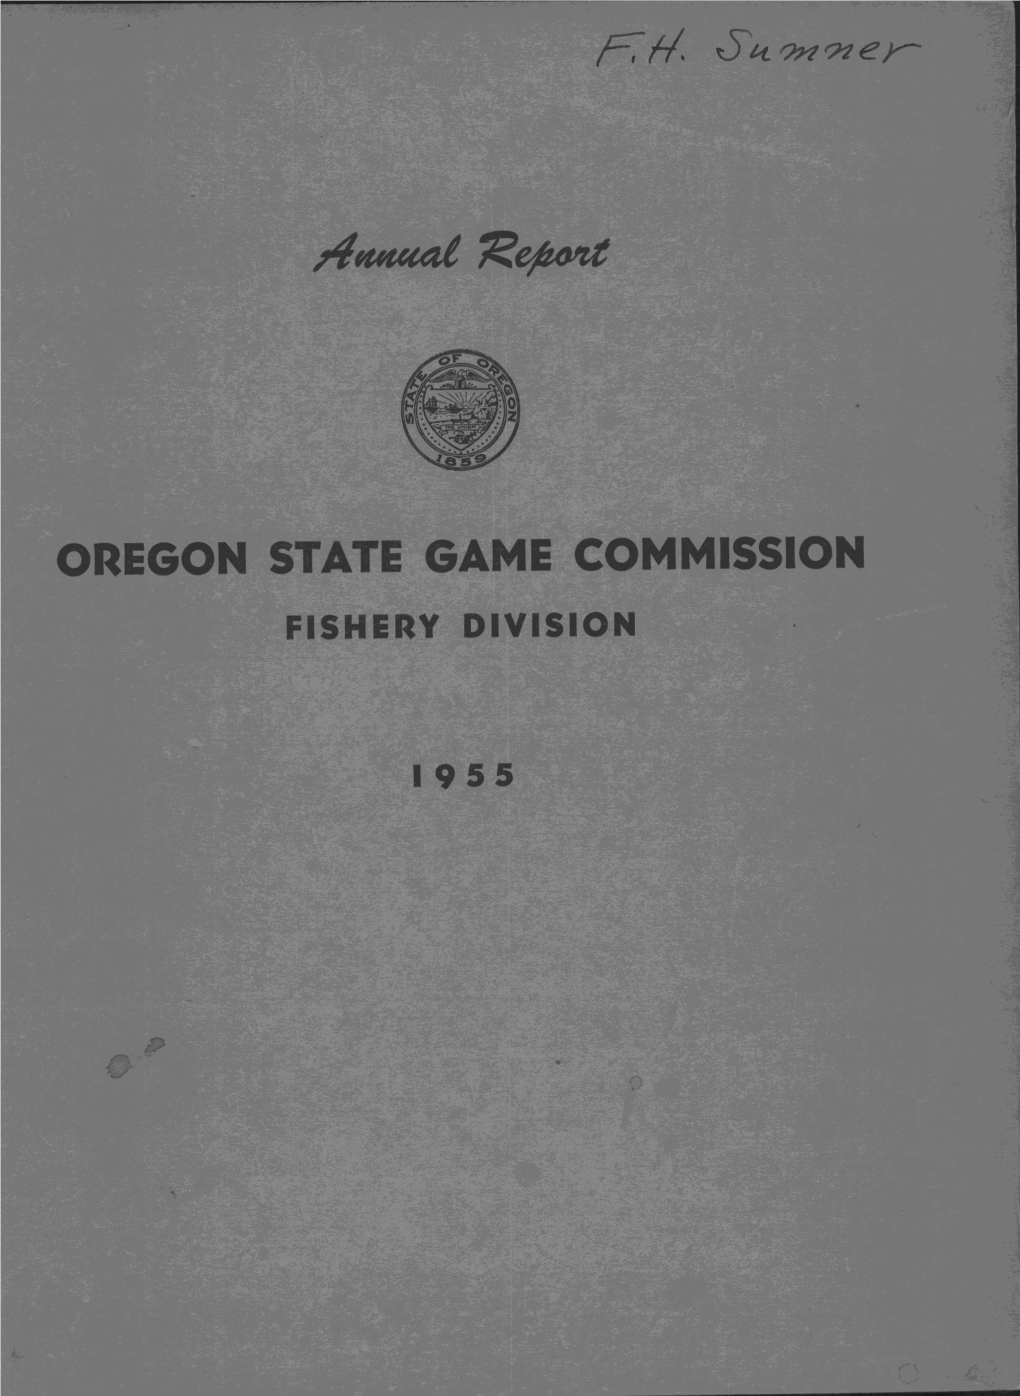 Oregon State Game Commission Were Consolidated and the Total Catch Determined